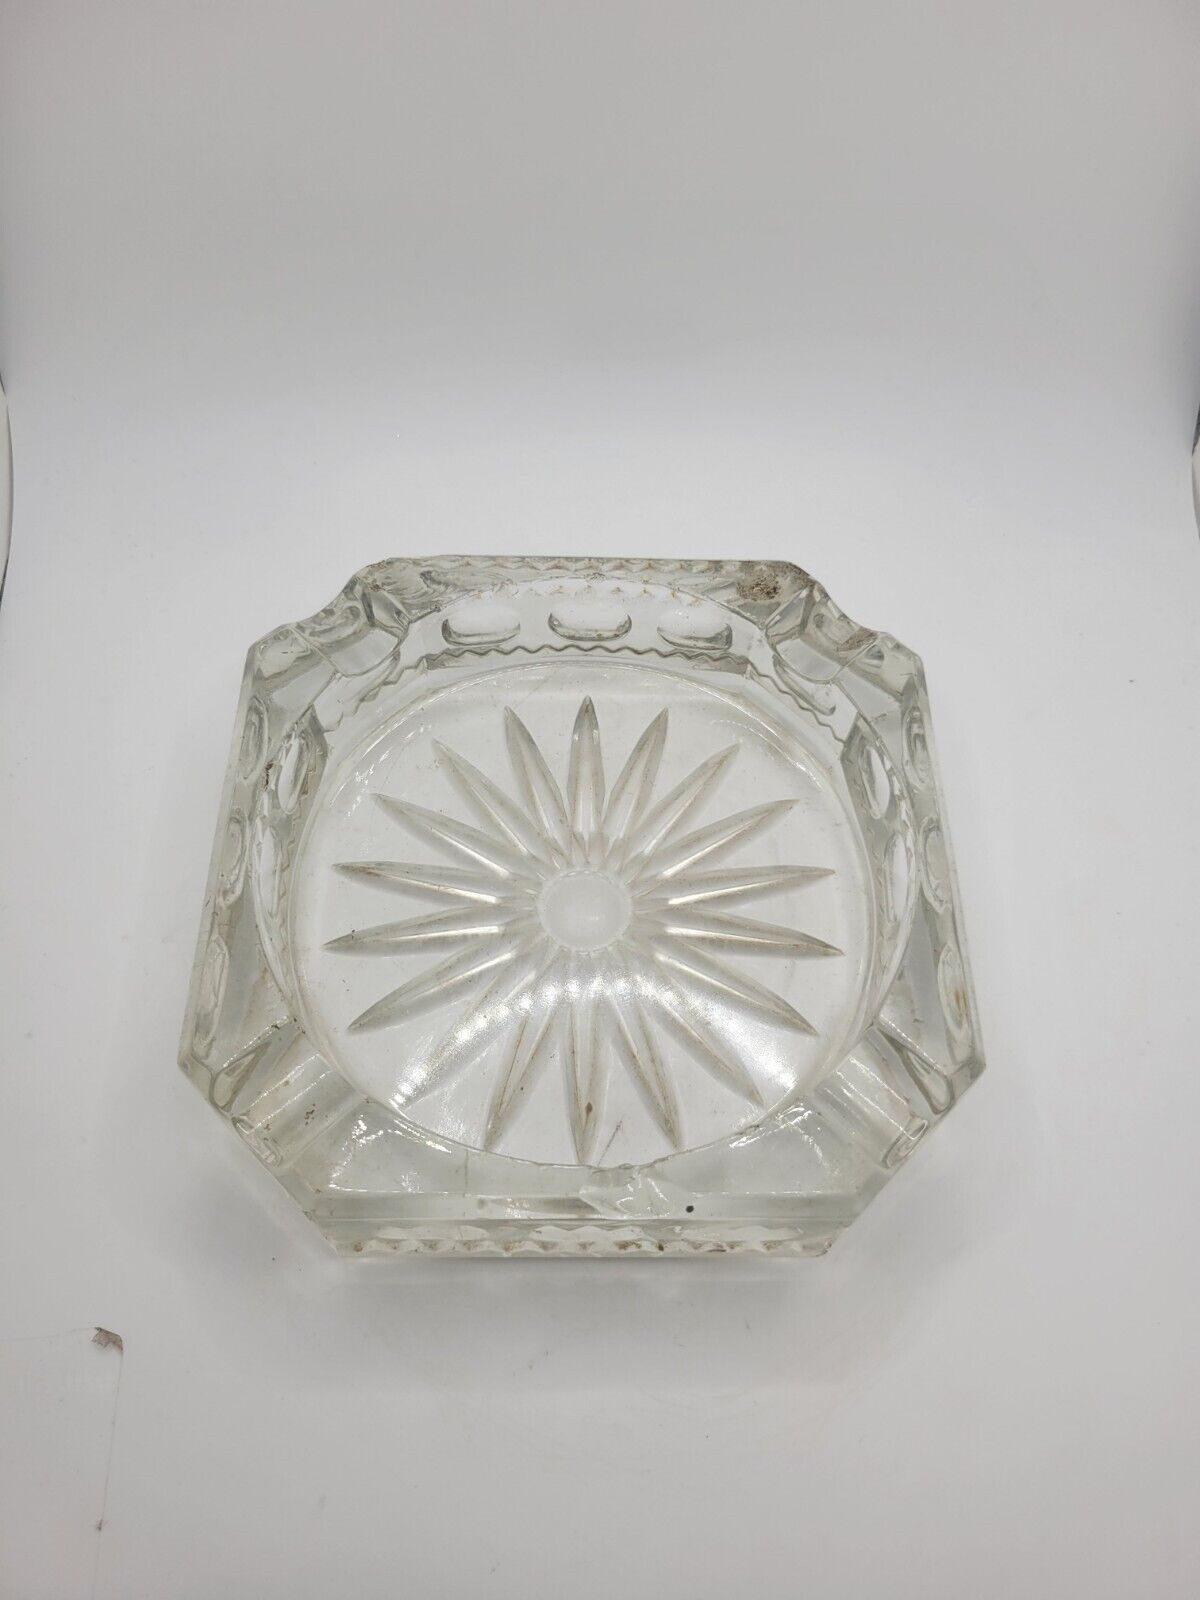 Vintage Heavy Weight Crystal Etched Ashtray Starburst Design 